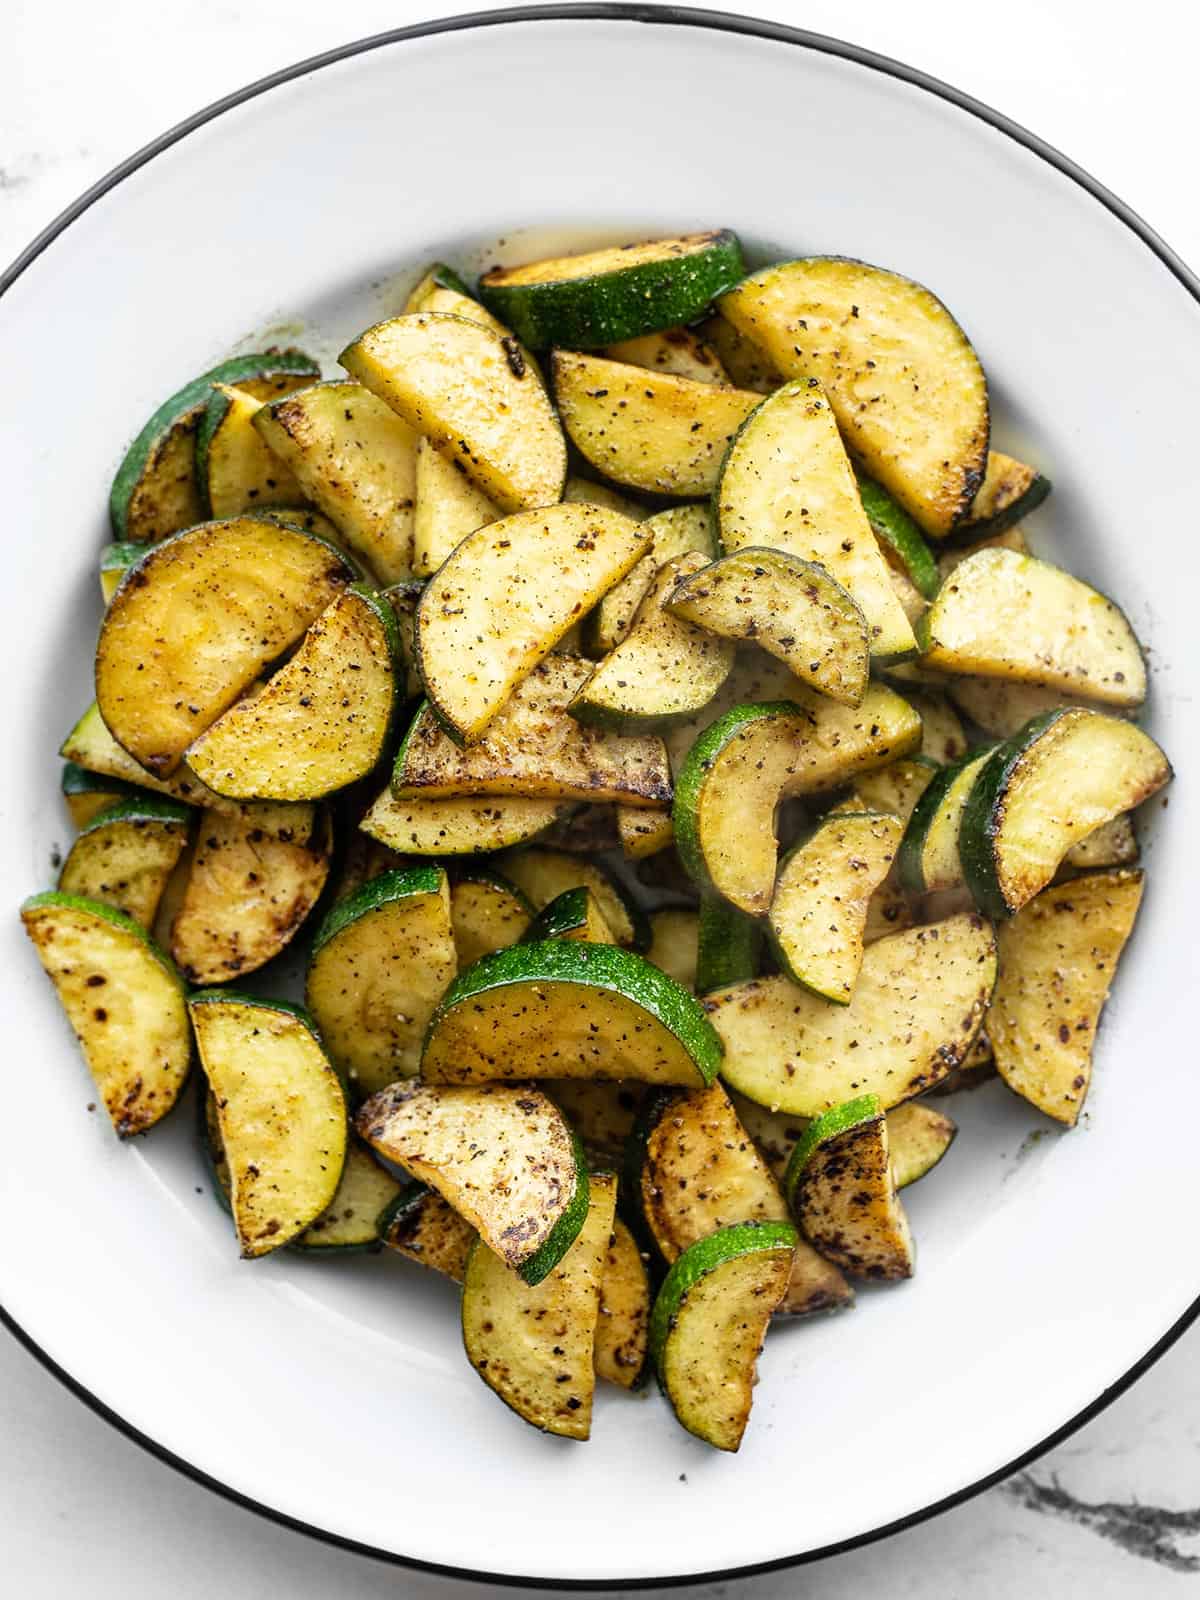 Overhead view of a bowl of lemon pepper zucchini